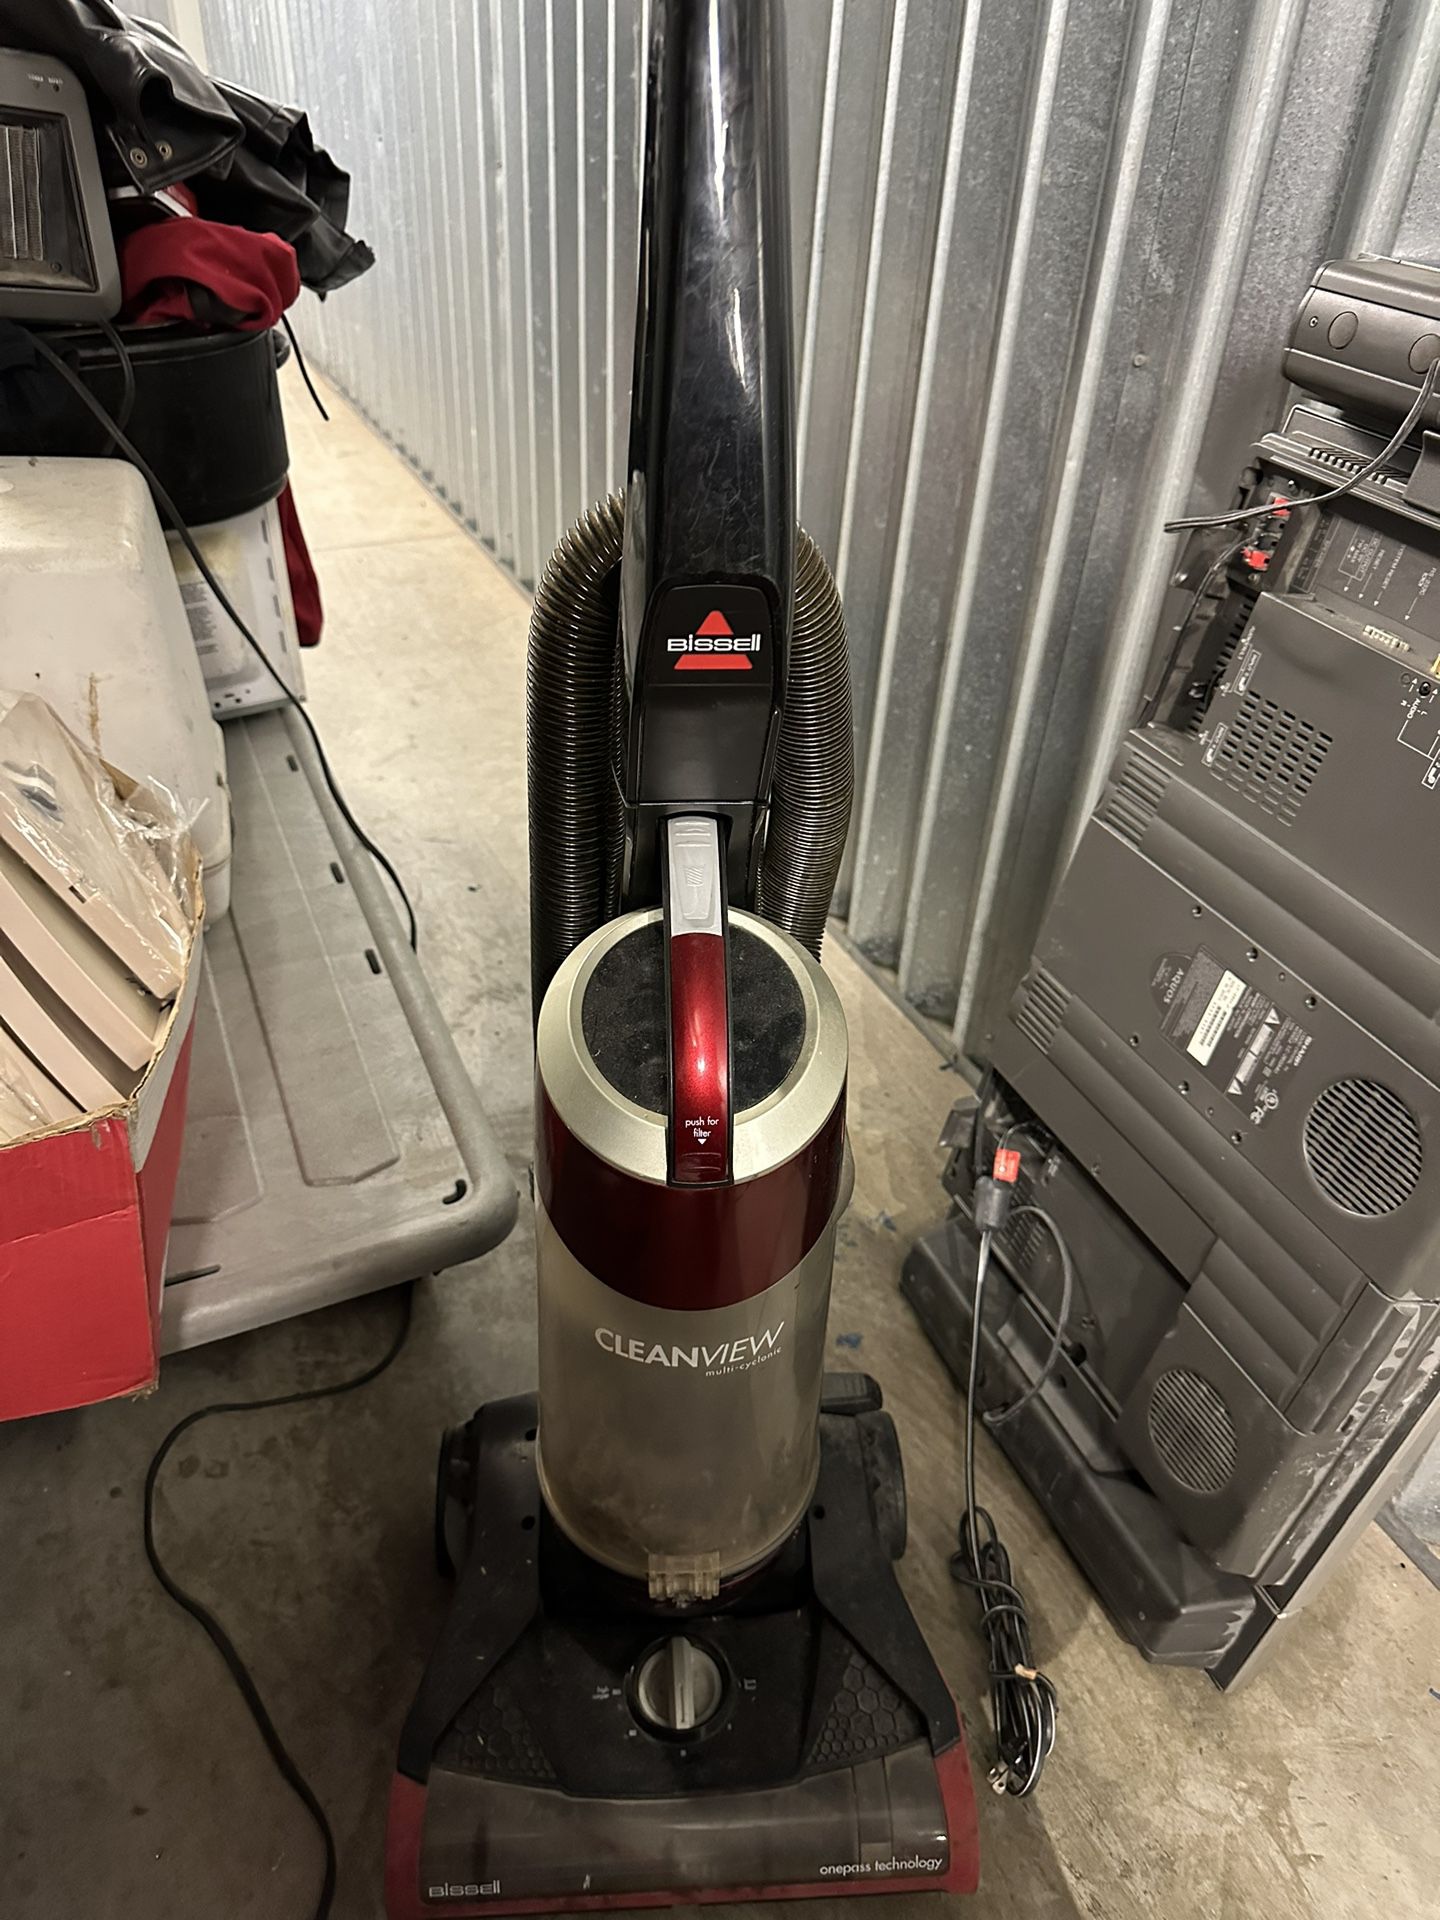 Craftsman 4 In 1 Vacuum, Shredder, Chipper And Blower for Sale in East  Haven, CT - OfferUp